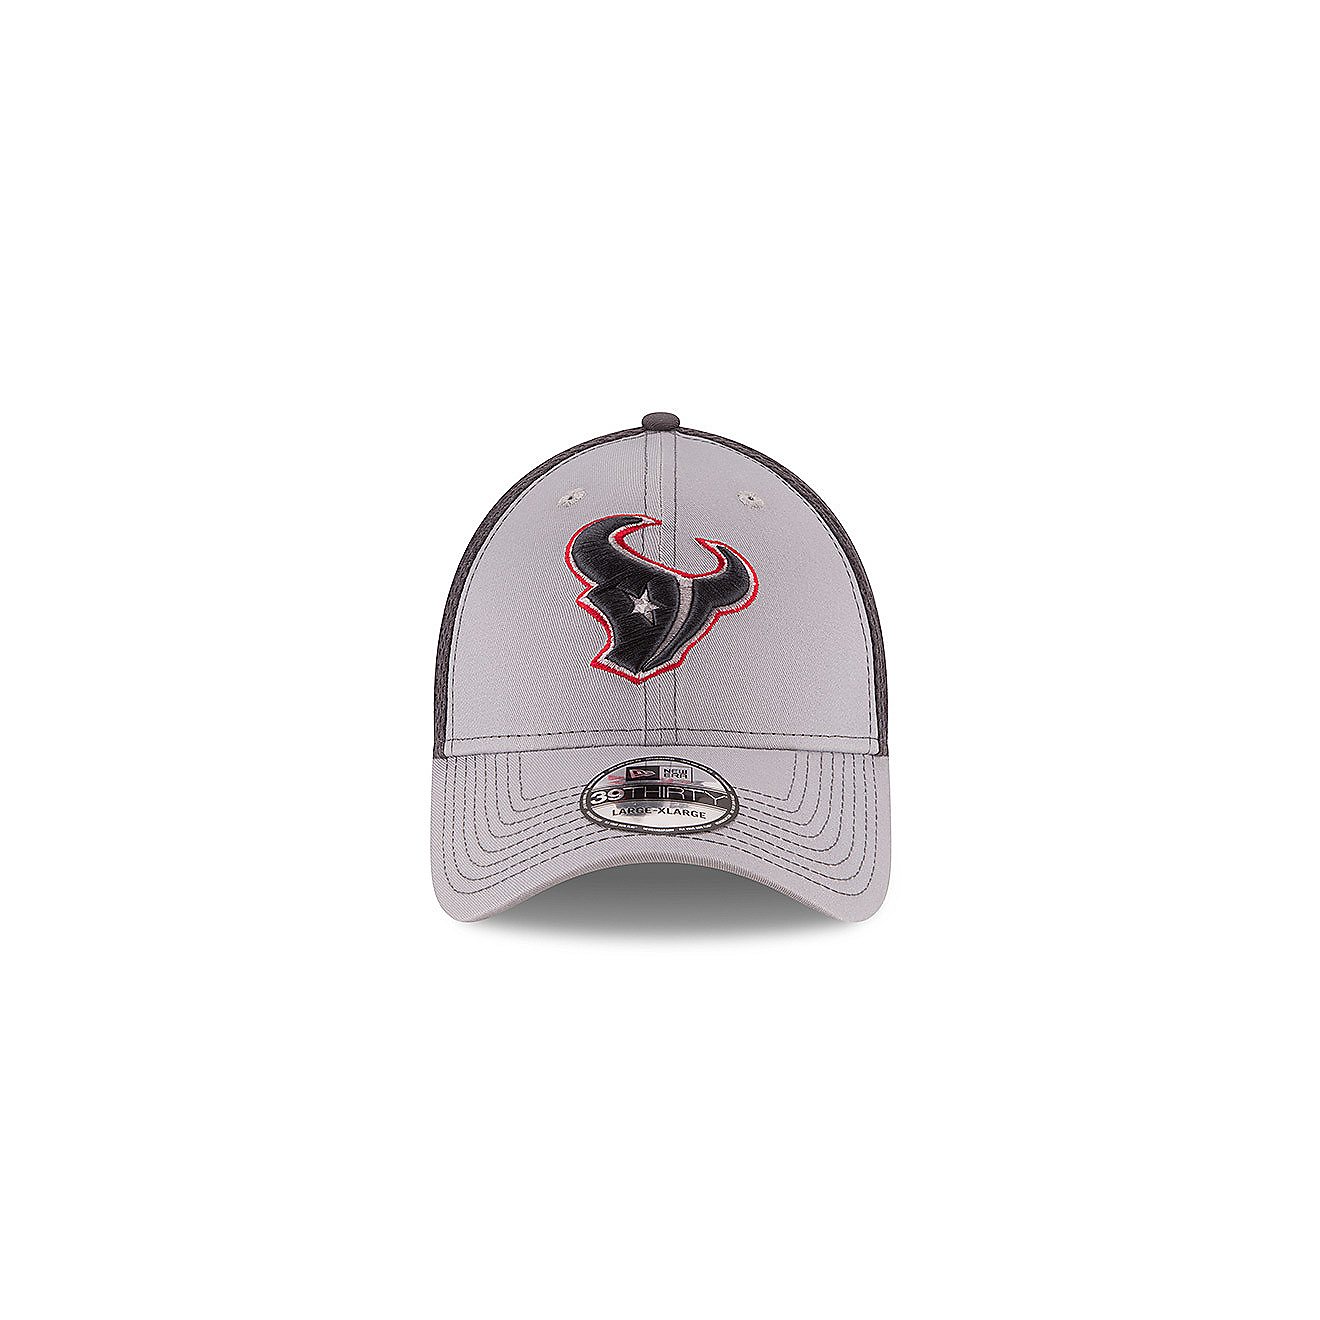 New Era Men's Houston Texans Grayed Out 39THIRTY Neo Cap                                                                         - view number 6